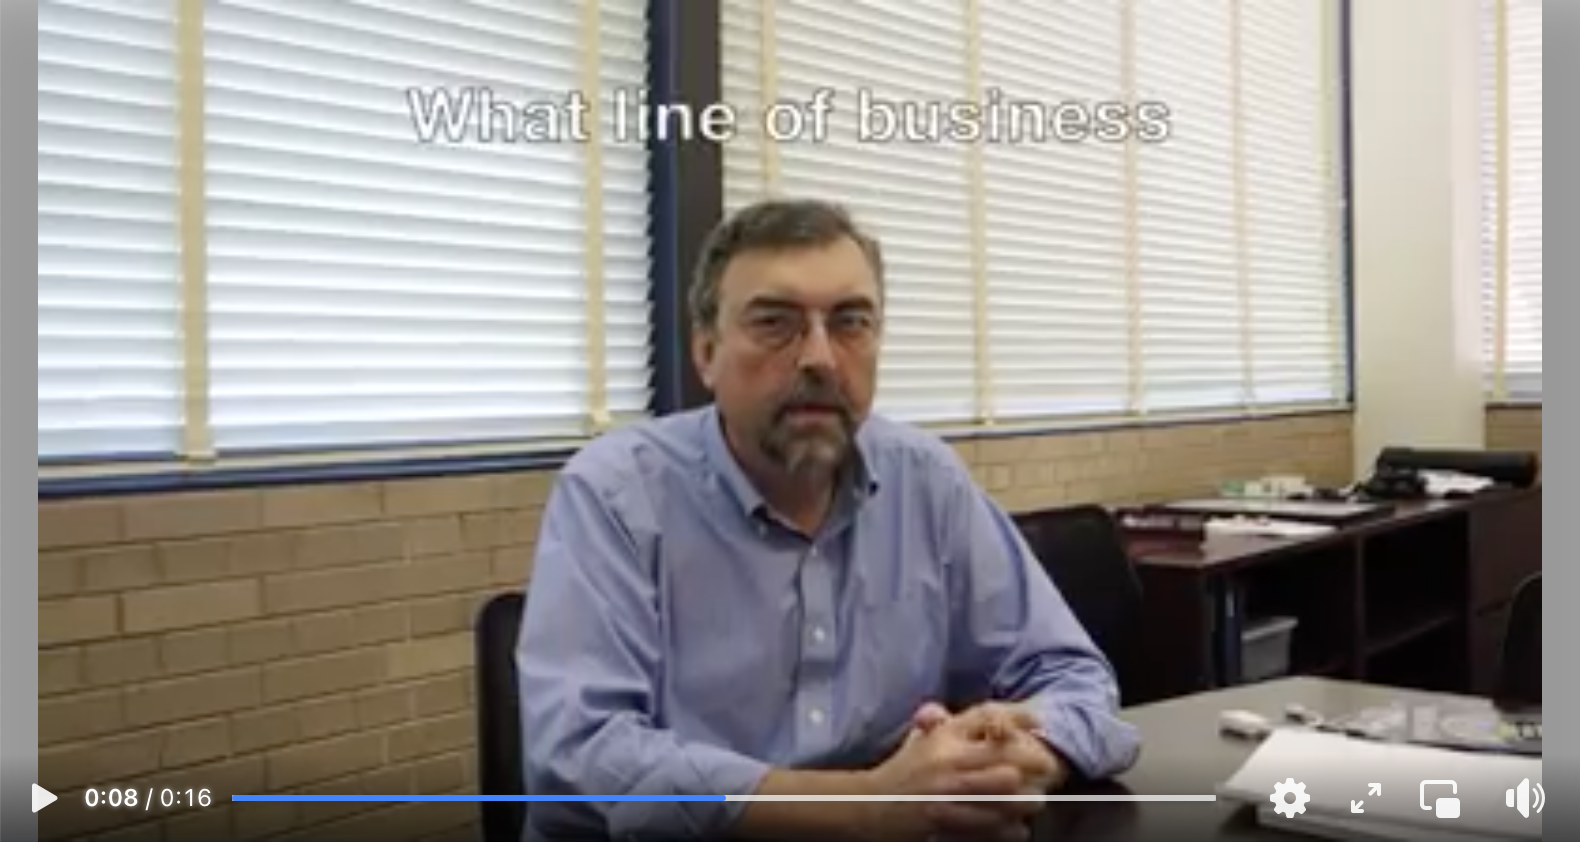 Thumbnail image from Giving Day trivia social post video featuring Professor Carlos Segre.